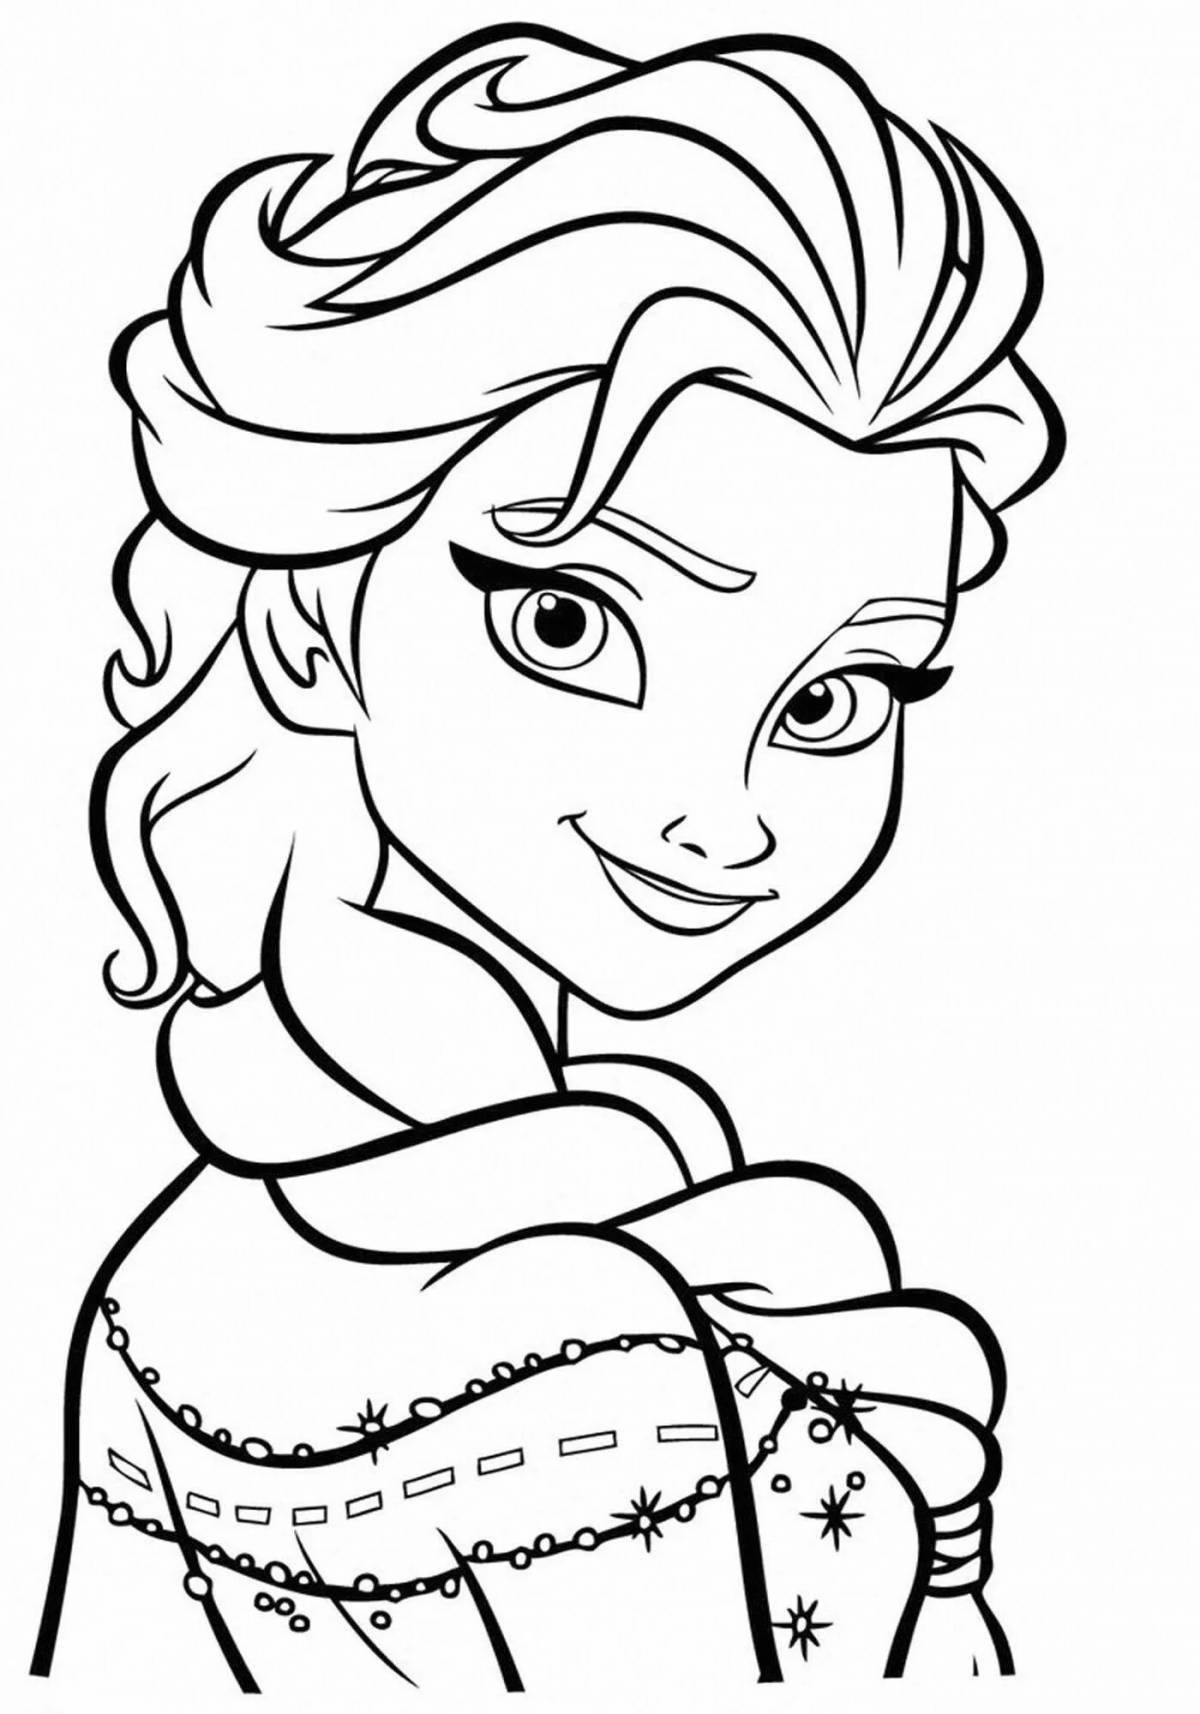 Elsa's wild coloring game for girls